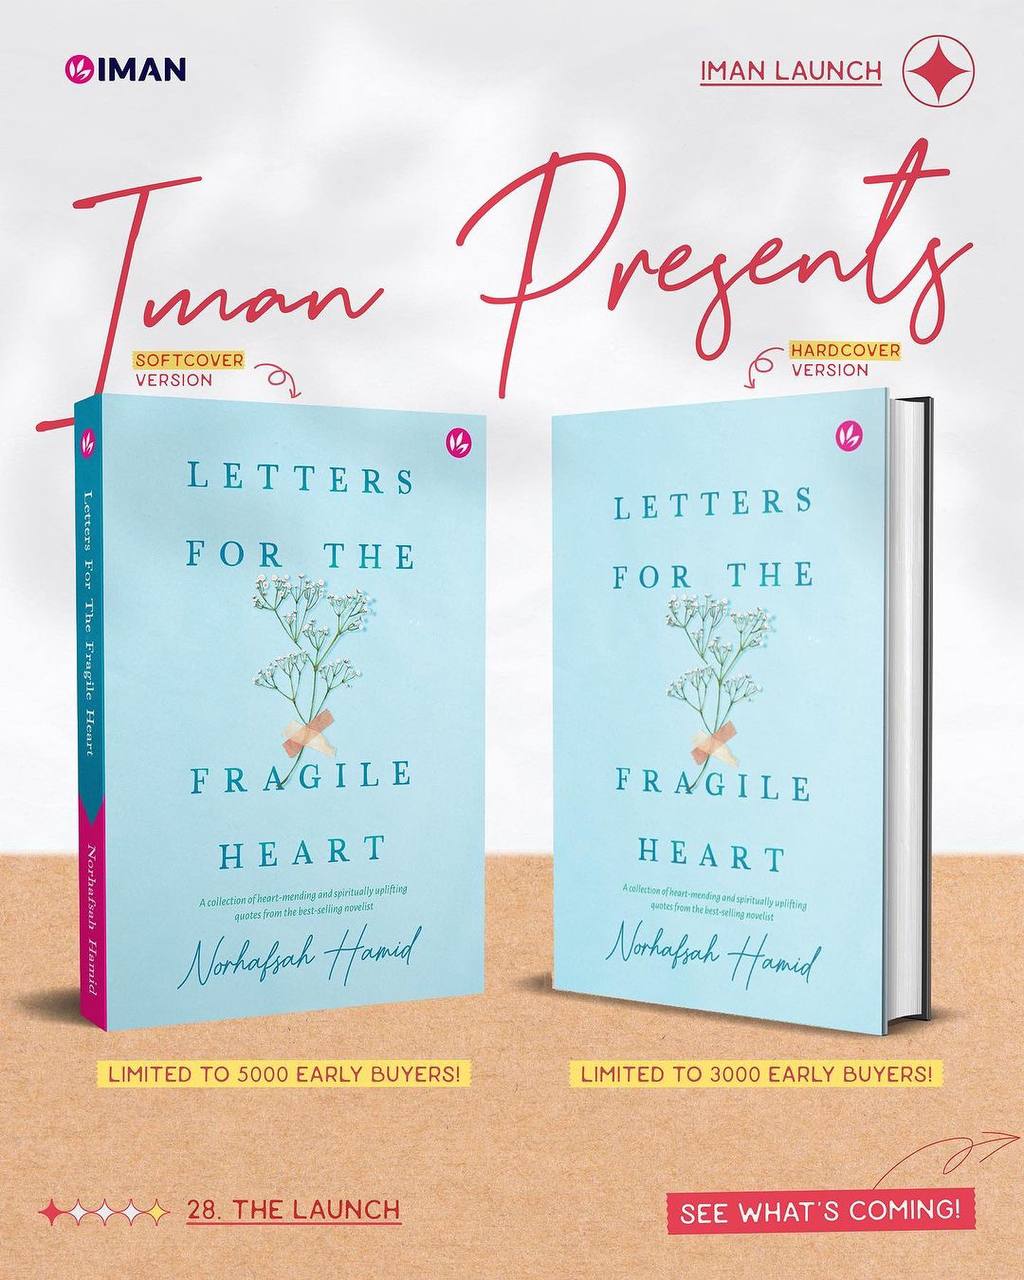 Iman Publication Book Fragile Heart Exclusive Package (Hardcover) by Norhafsah Hamid 201605